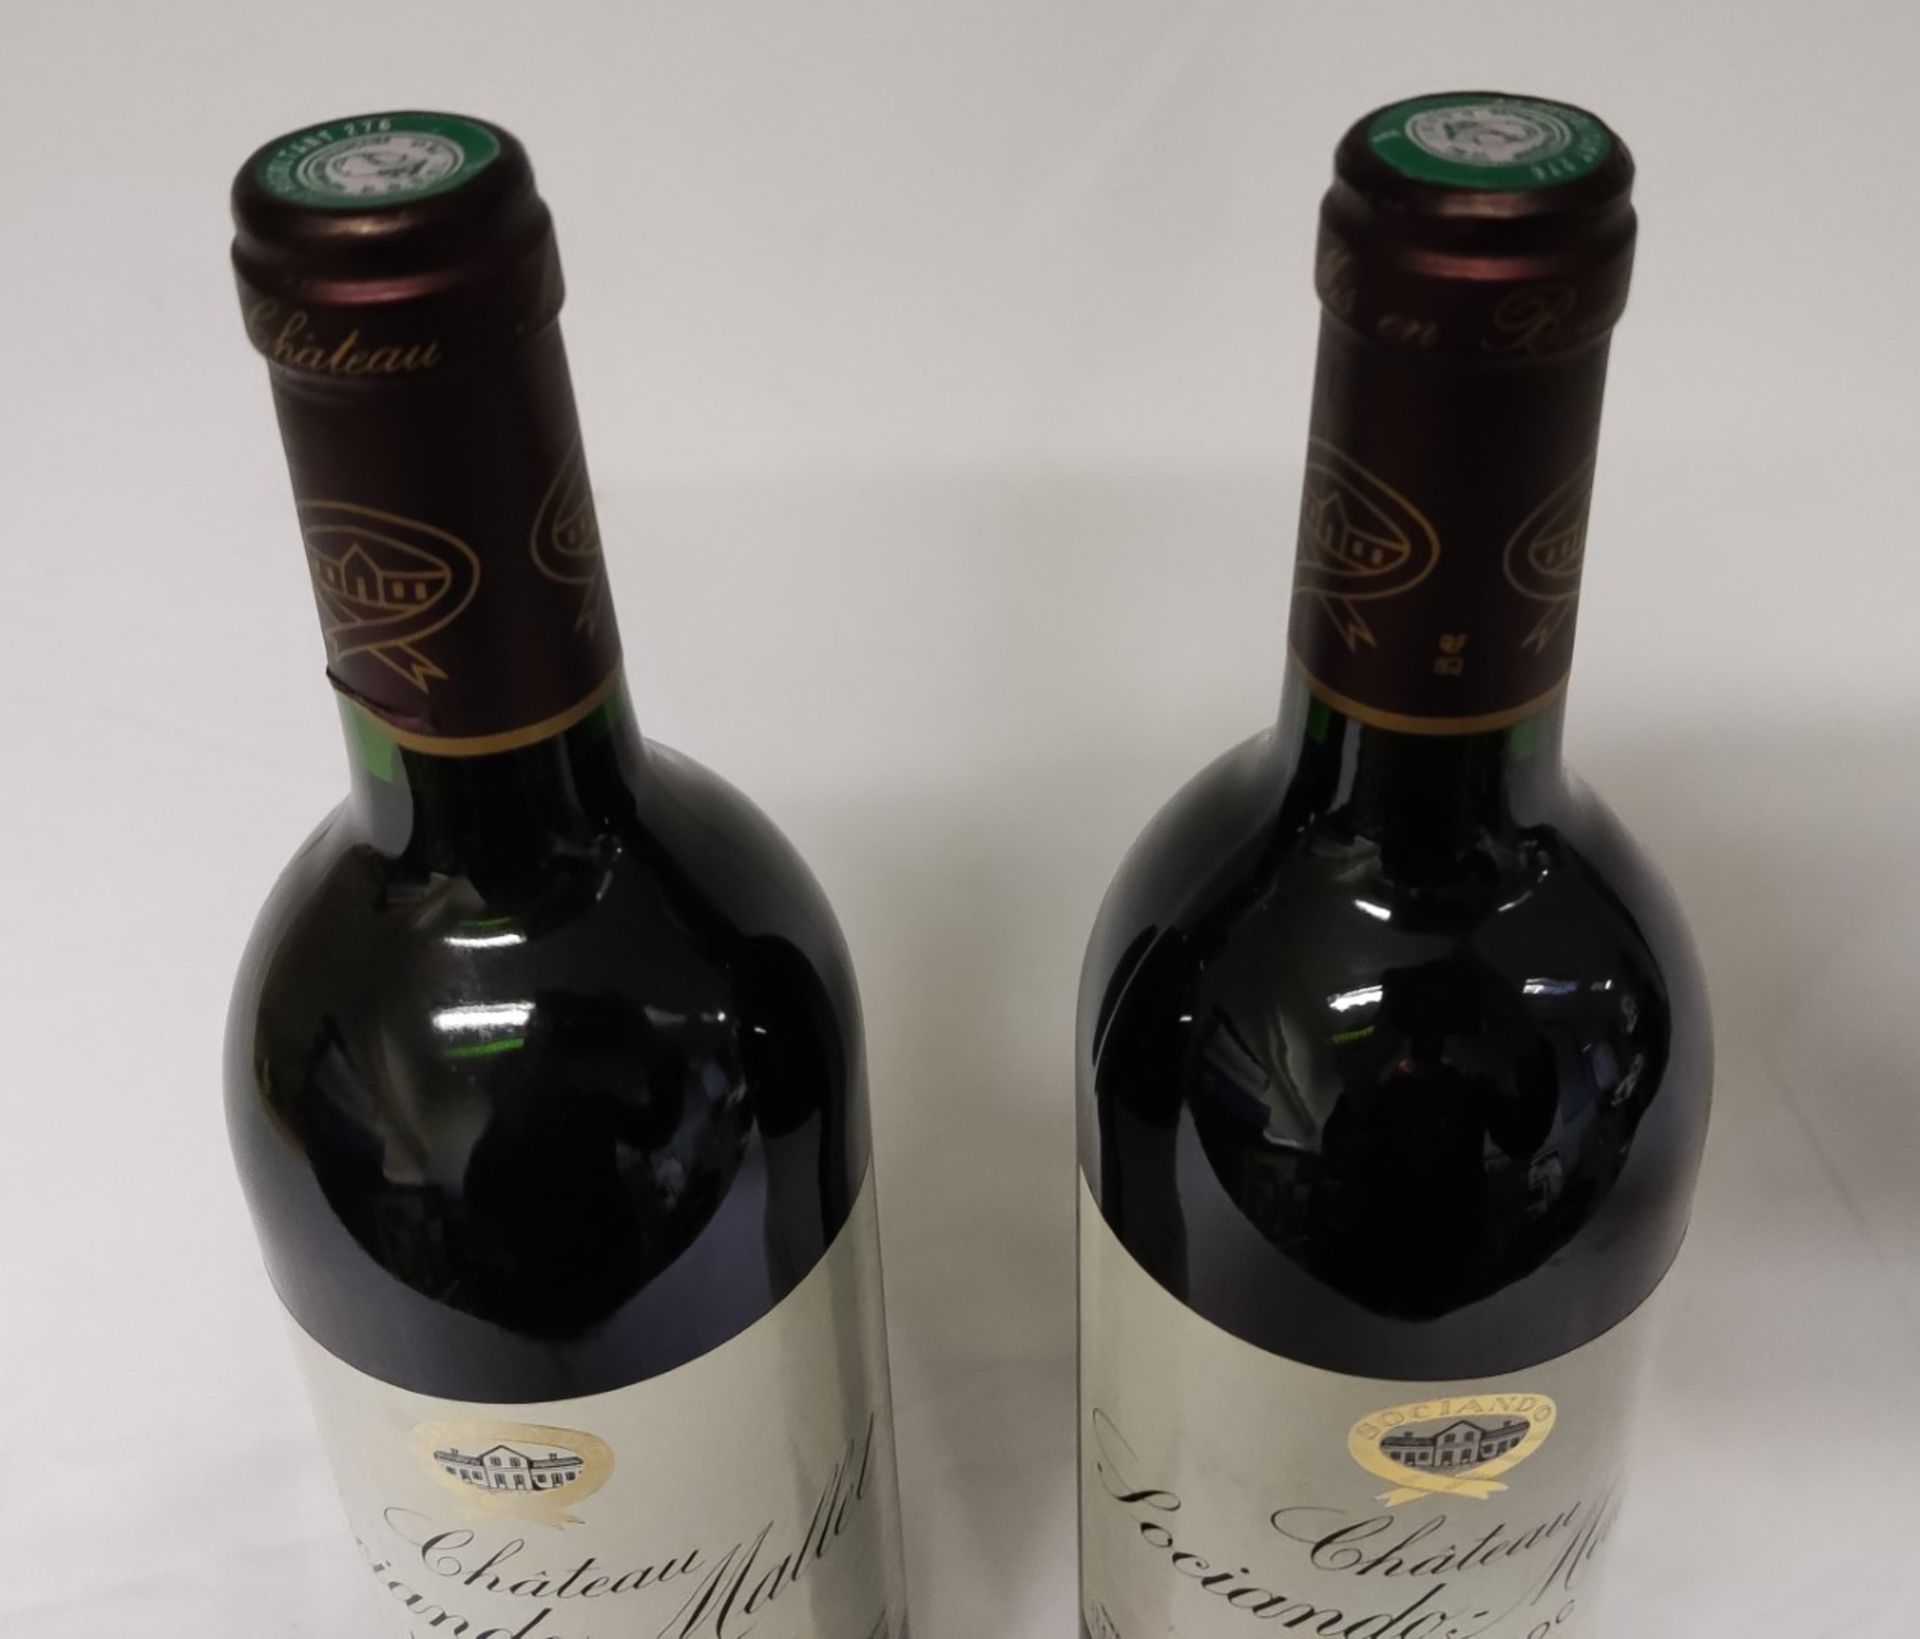 2 x Bottles of 1996 Chateau Sociando-Mallet, Haut-Medoc, France - Dry Red Wine - RRP £260 - Image 6 of 7